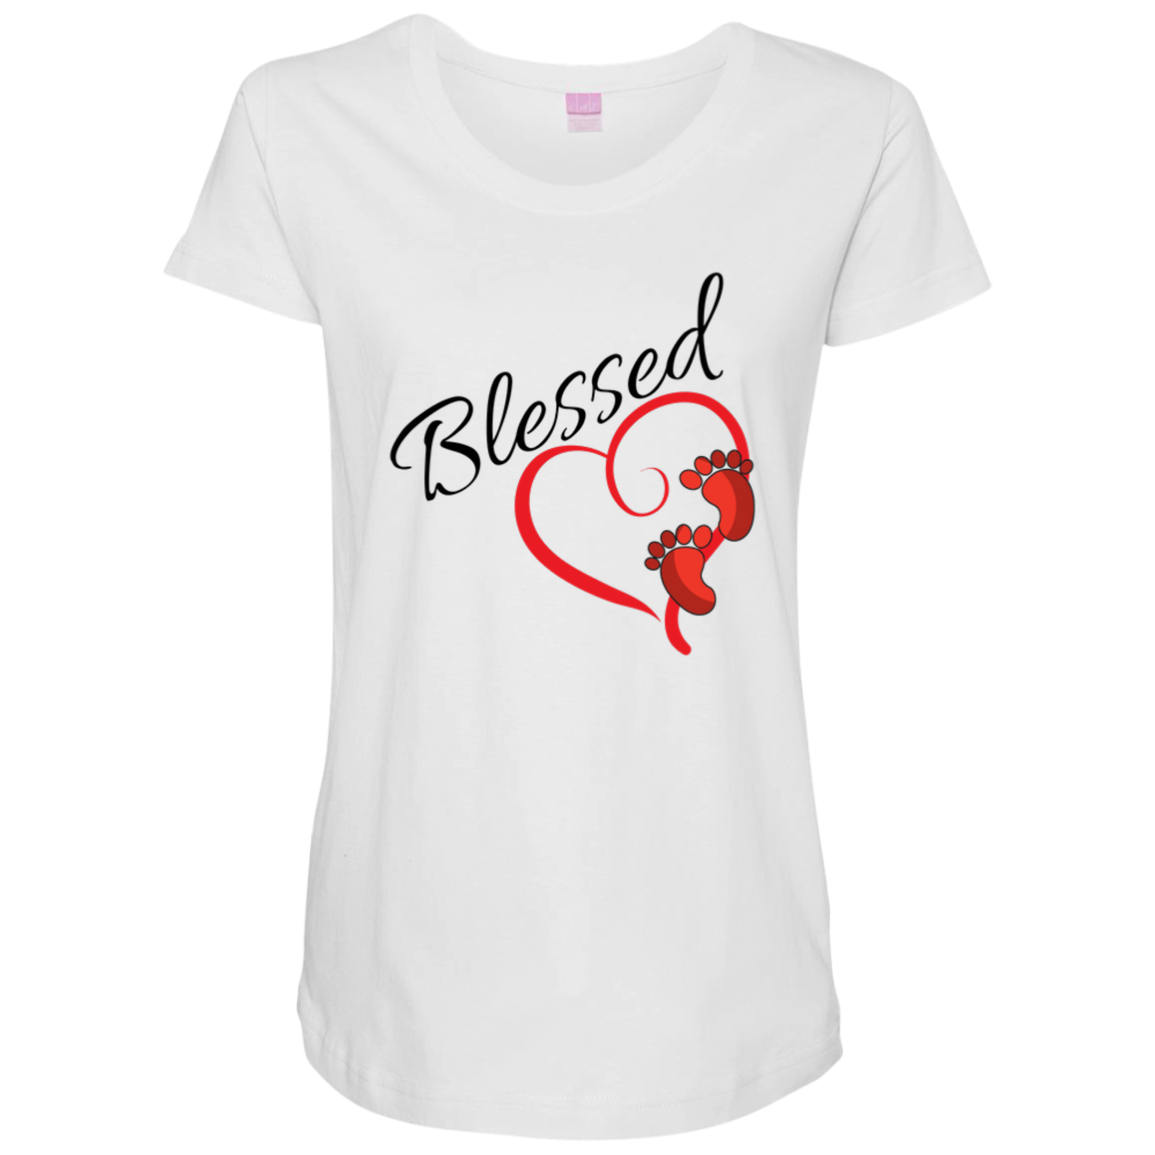 Blessed Maternity Top